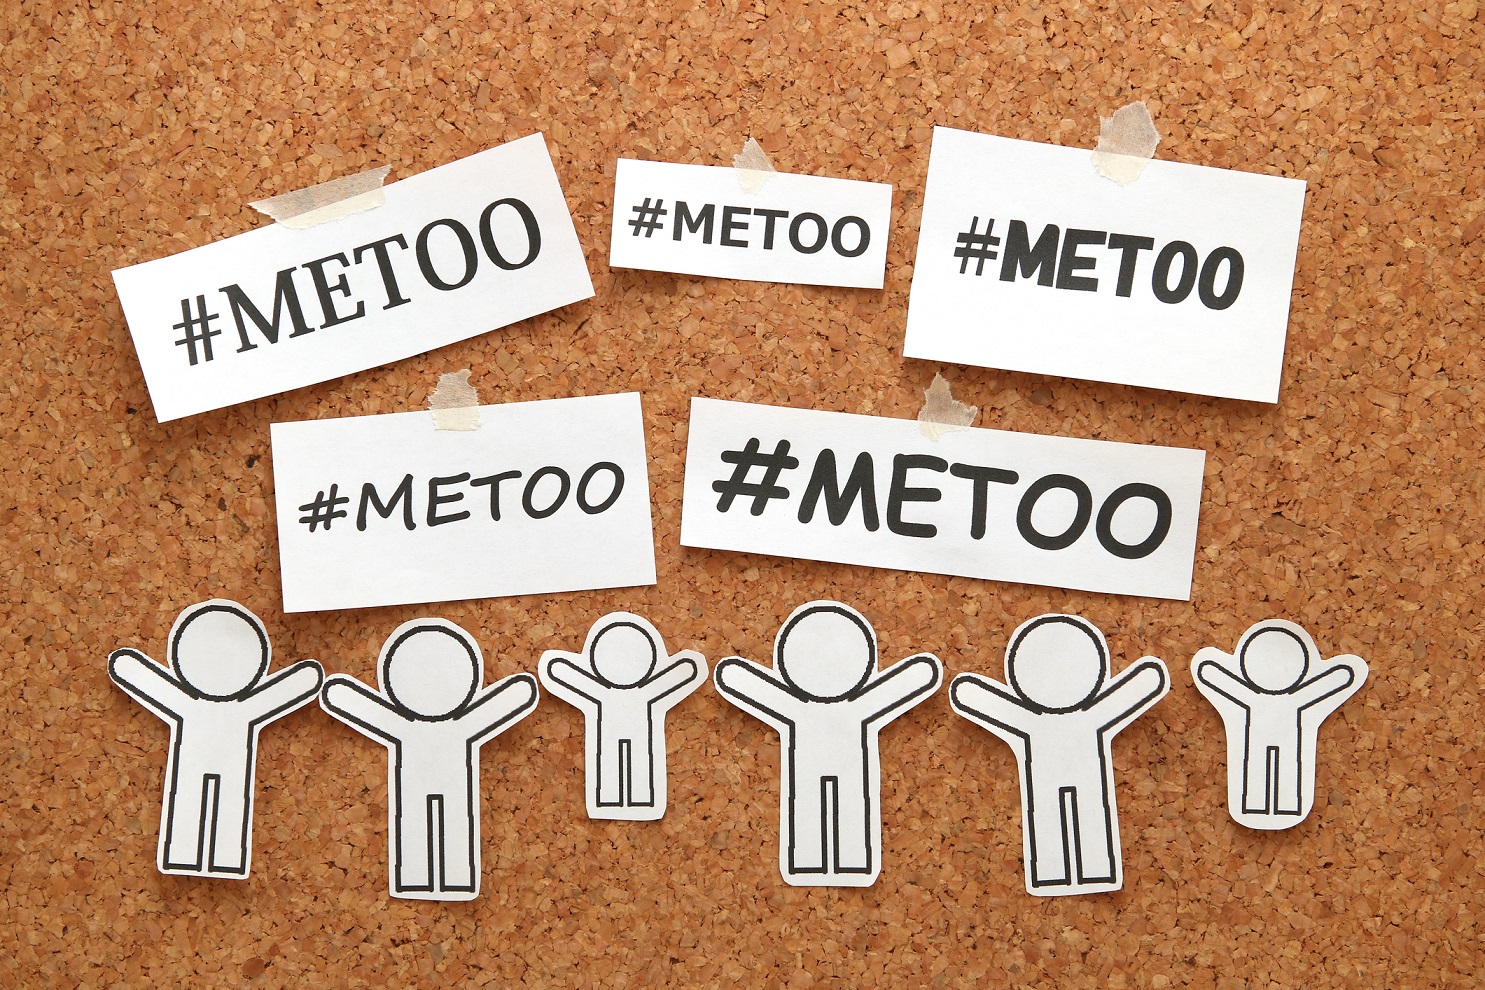 Ep. 1032: Is the Bible Behind the Times on #metoo?